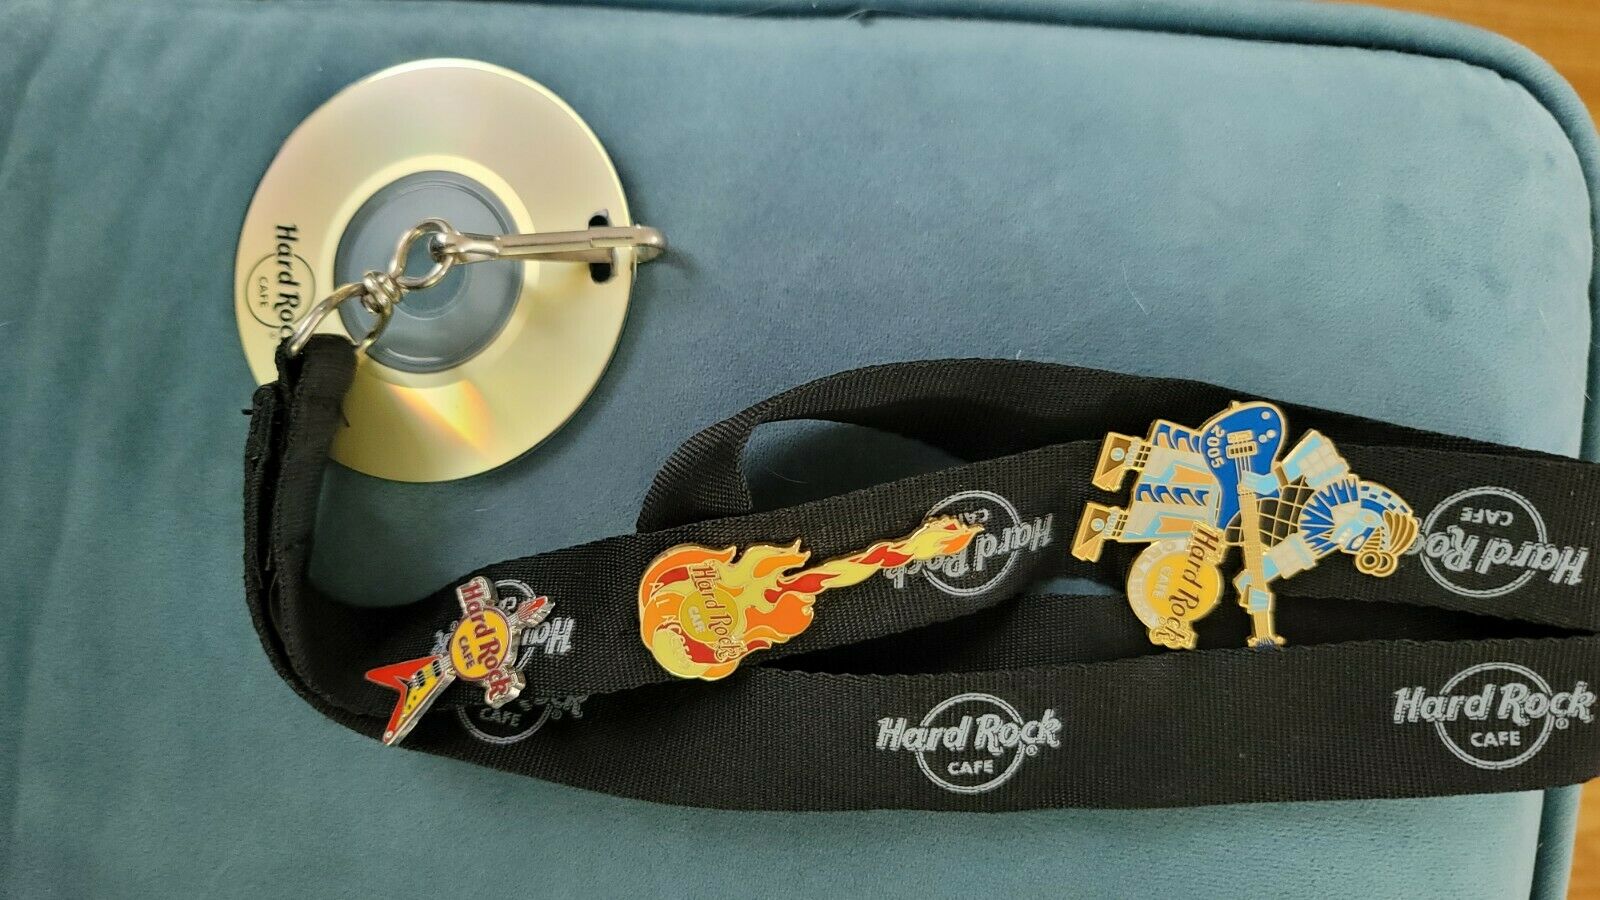 Hard Rock Cafe Lanyard With Cd And 3 Pins, V Guitar, Fire, Egyptian